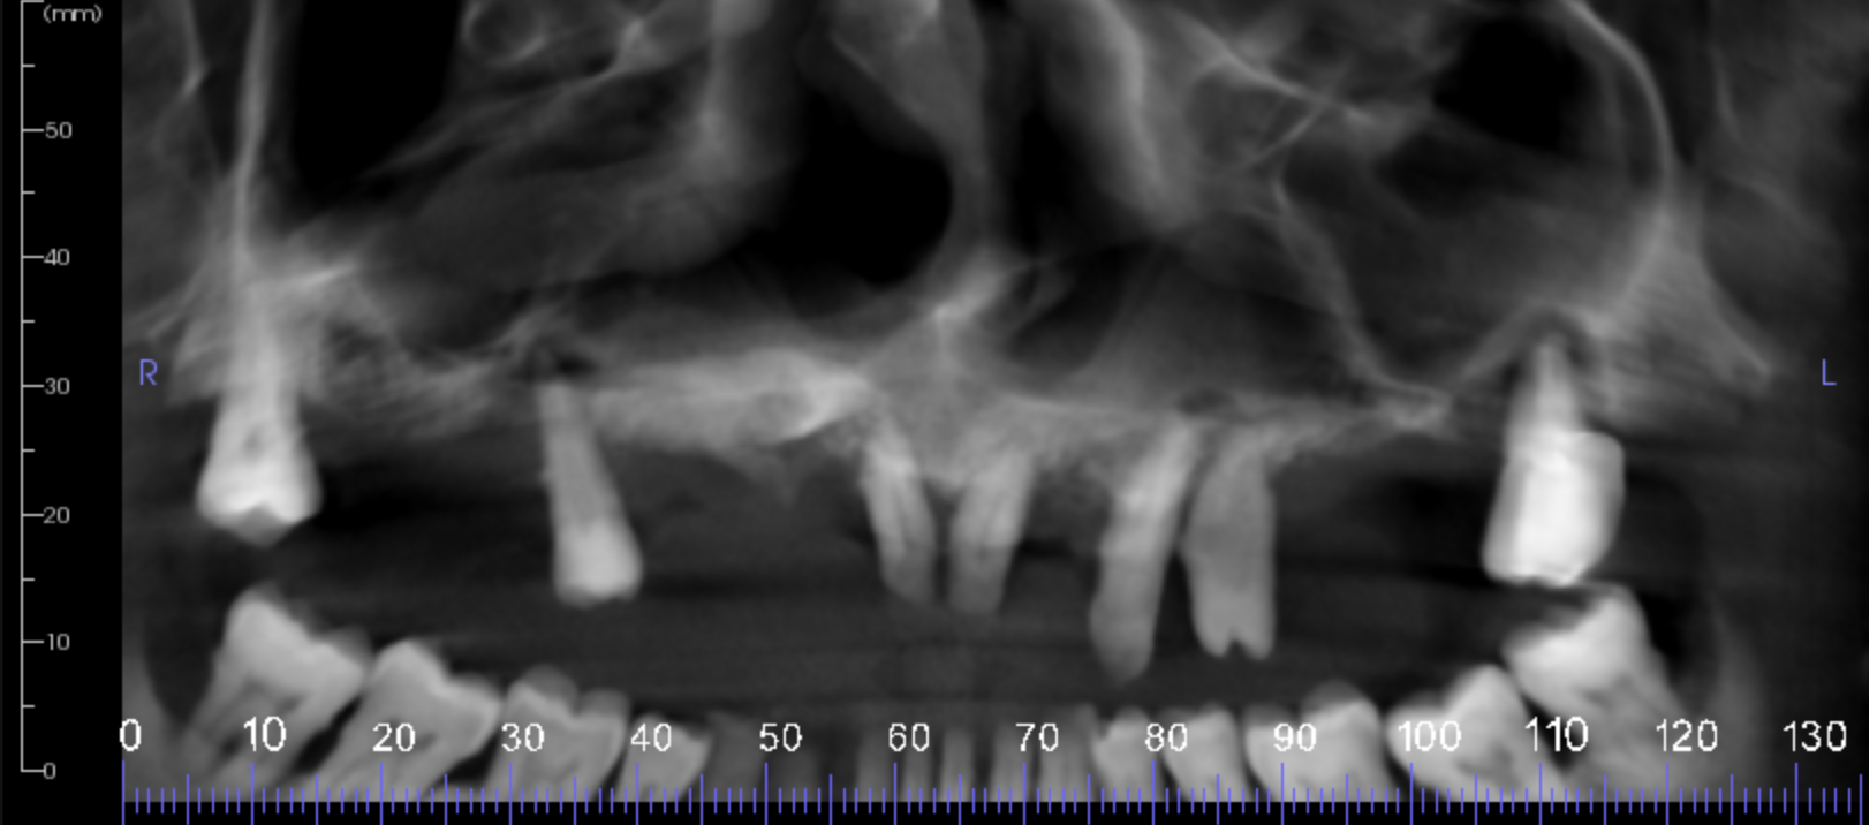 CBCT reconstructed panoramic image